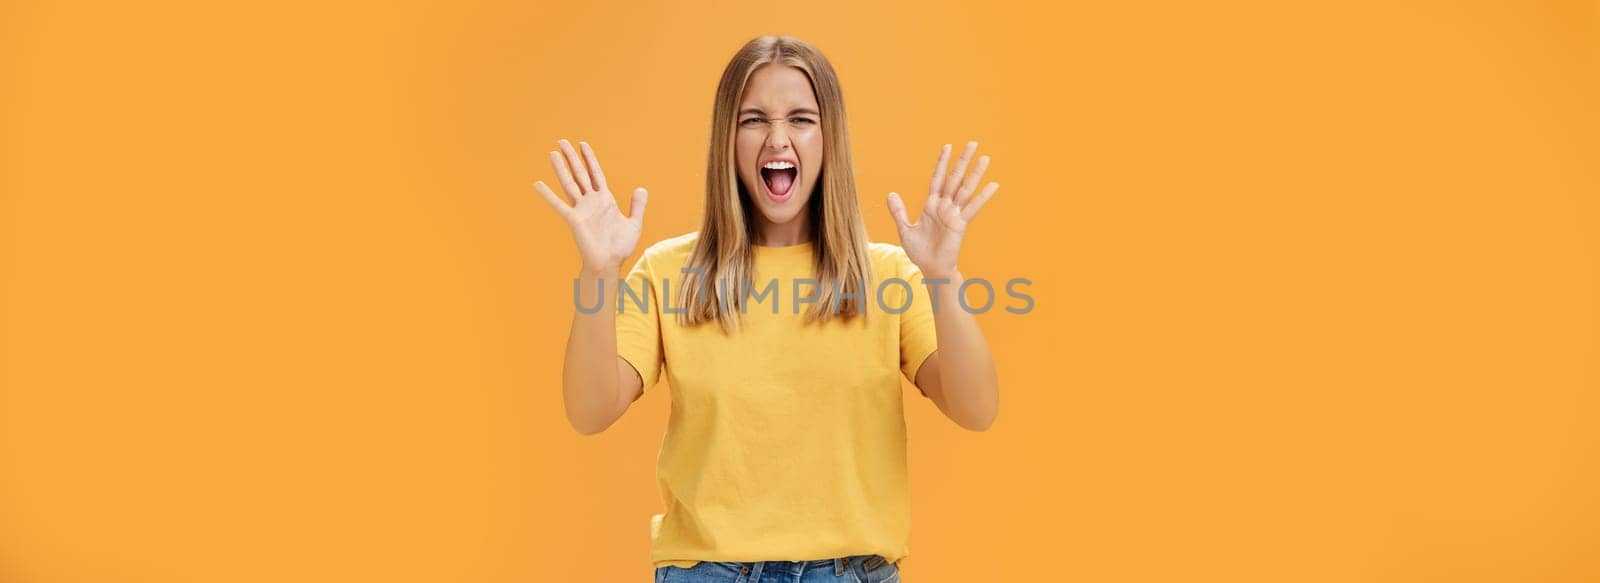 Woman releasing stress yelling with joy and pleasure gesturing with raised arms being daring and rebellious not afraid to show emotions standing passionate and expressive against orange background. Body language concept